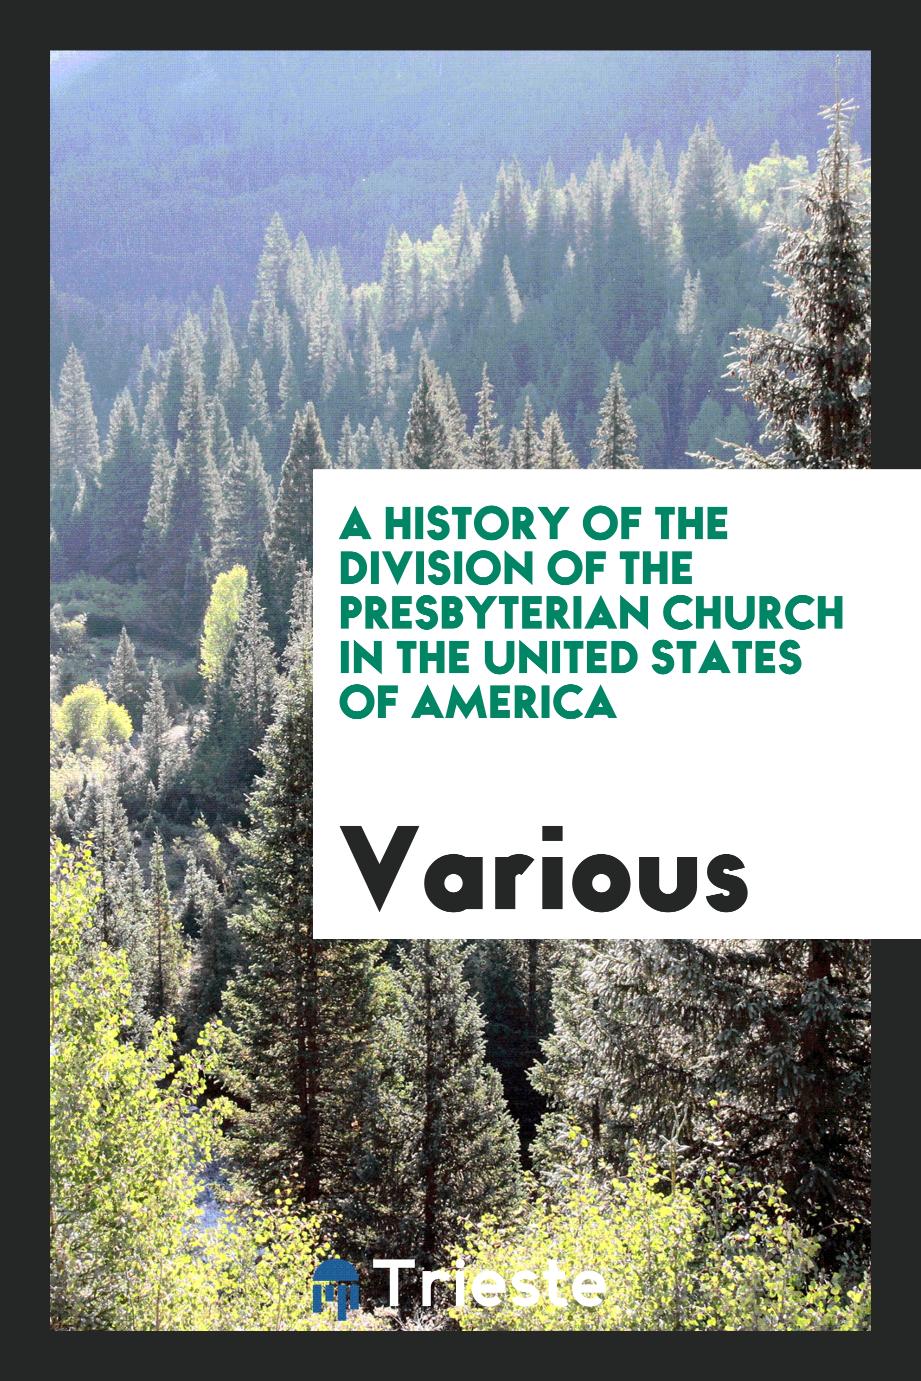 A history of the division of the Presbyterian church in the United States of America